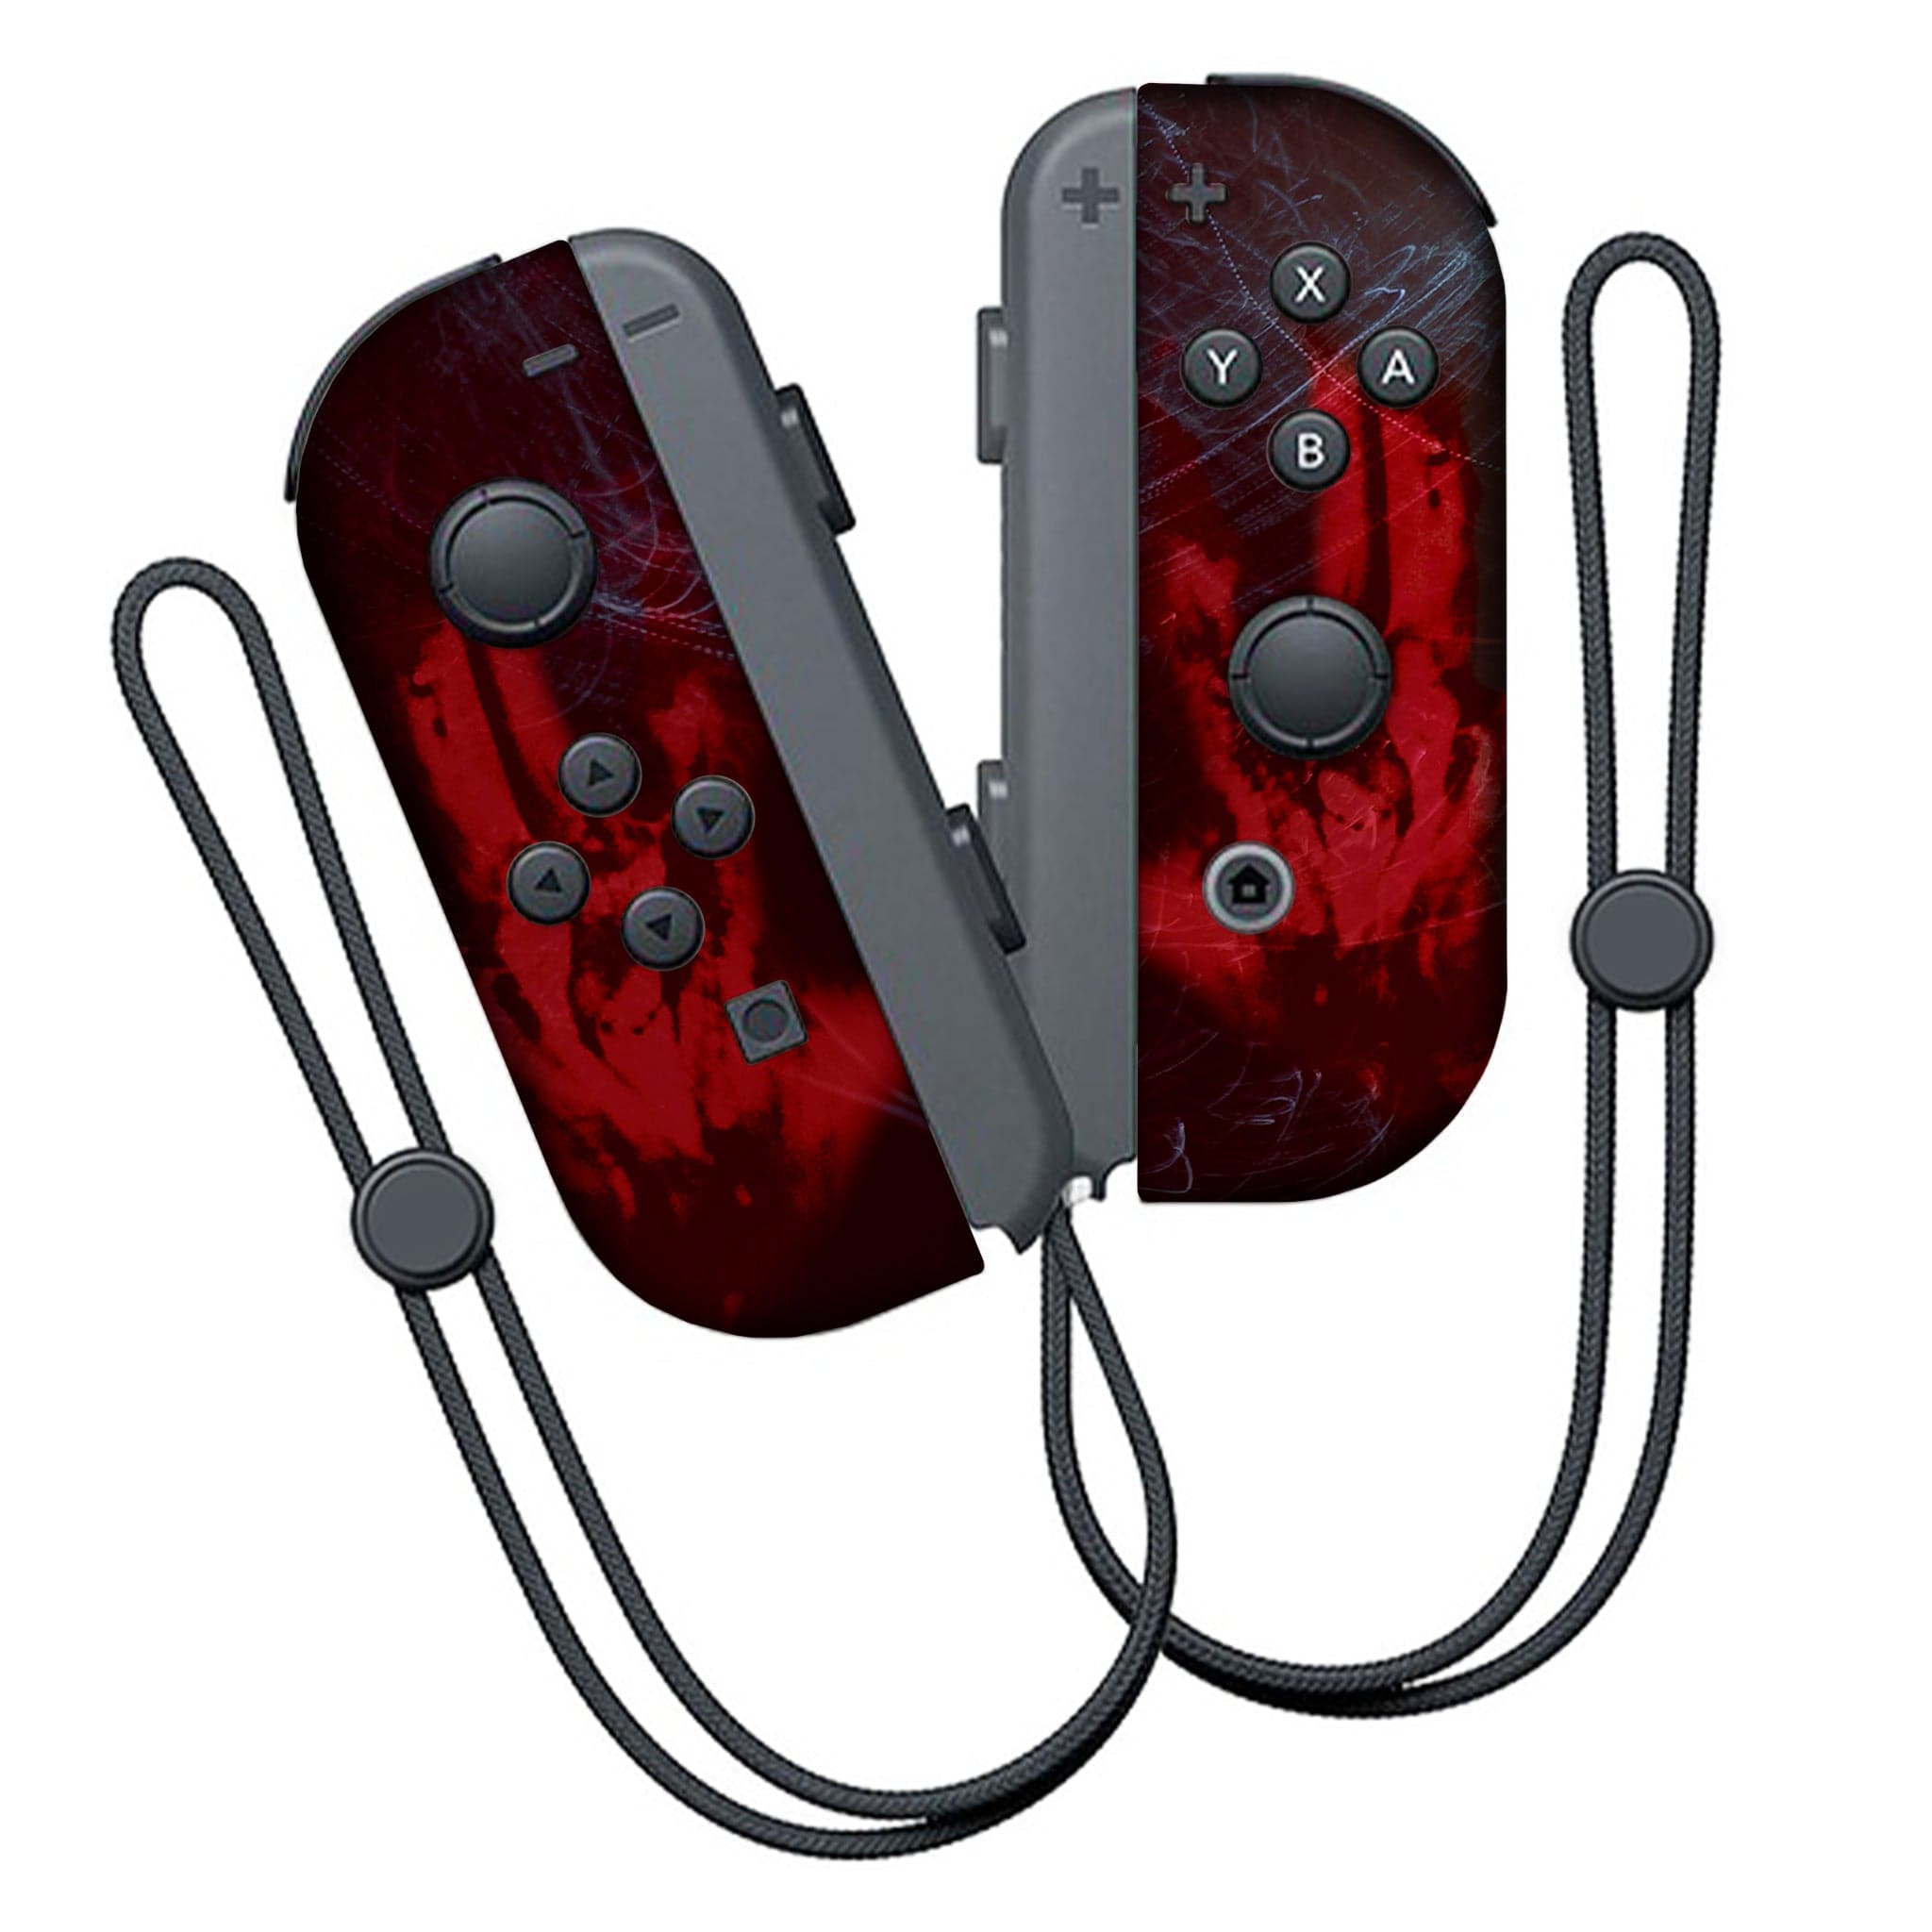 Dawn of the Dead Inspired Nintendo Switch Joy-Con Left and Right Switch Controllers by Nintendo